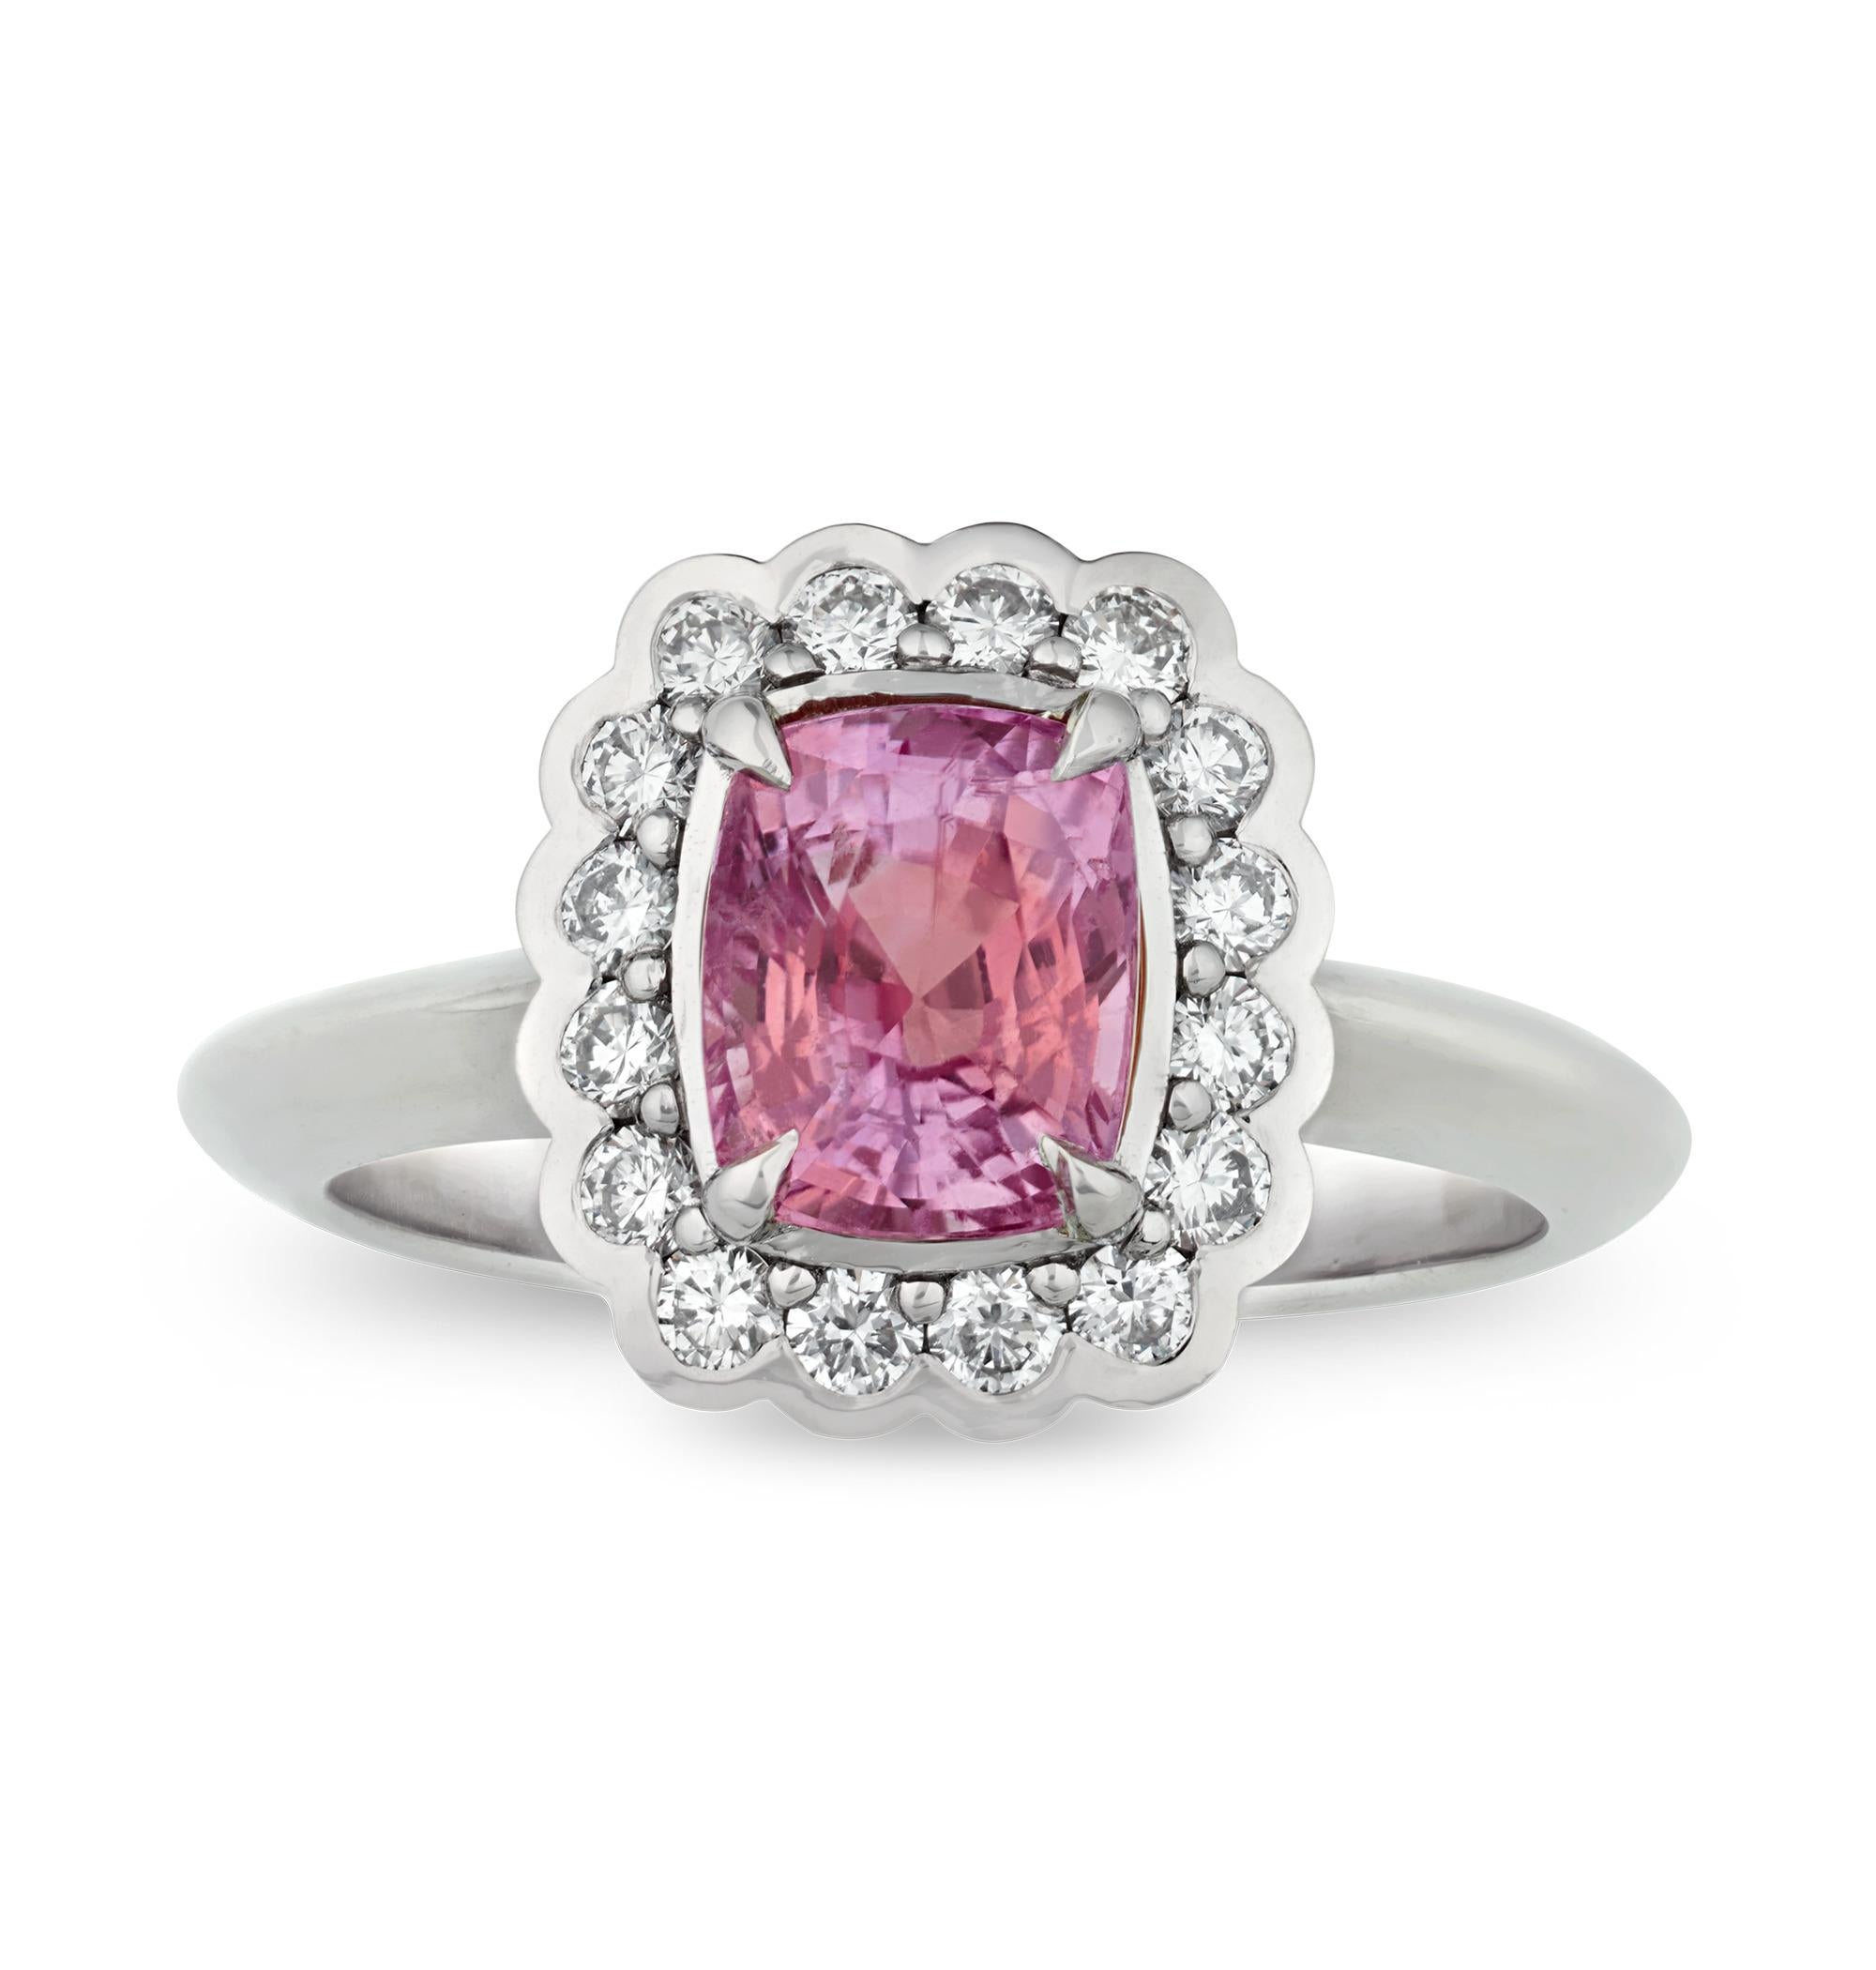 Cushion Cut Padparadscha Sapphire Ring, 2.04 Carats For Sale